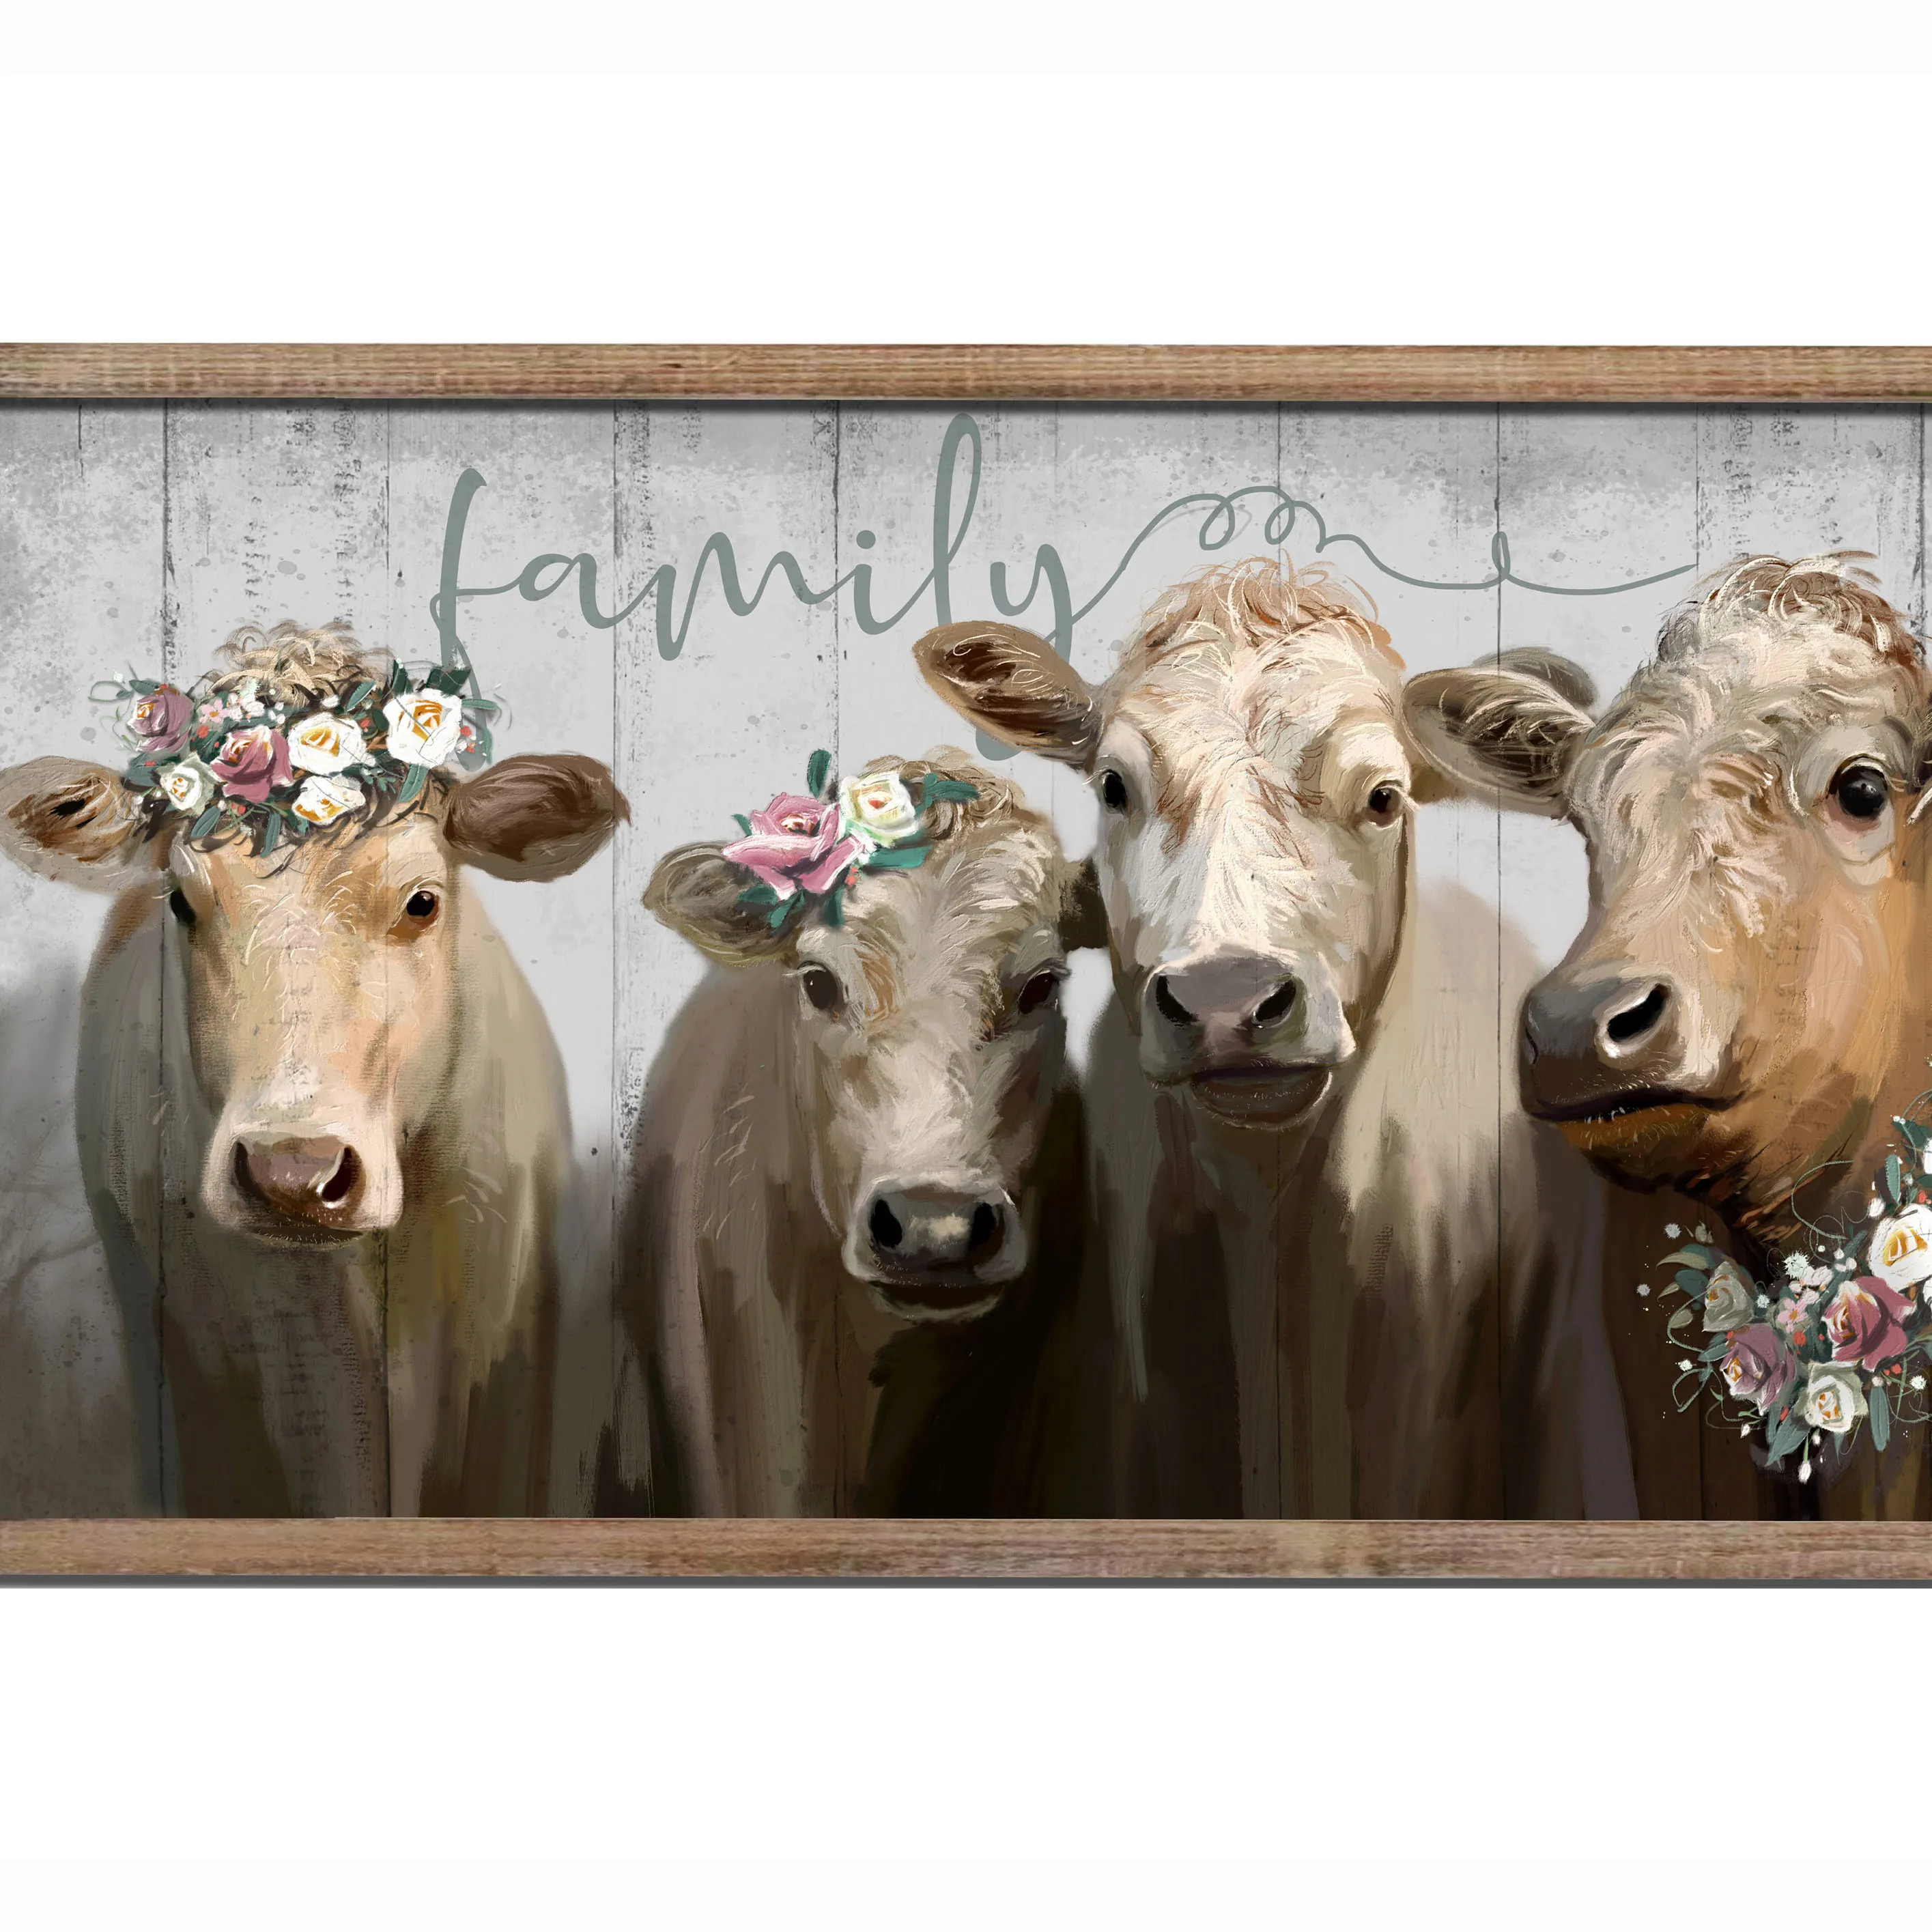 Modern Printmaking Wall Art Painting Hand Painted Farm Cow Canvas Cafe Kitchen Decoration